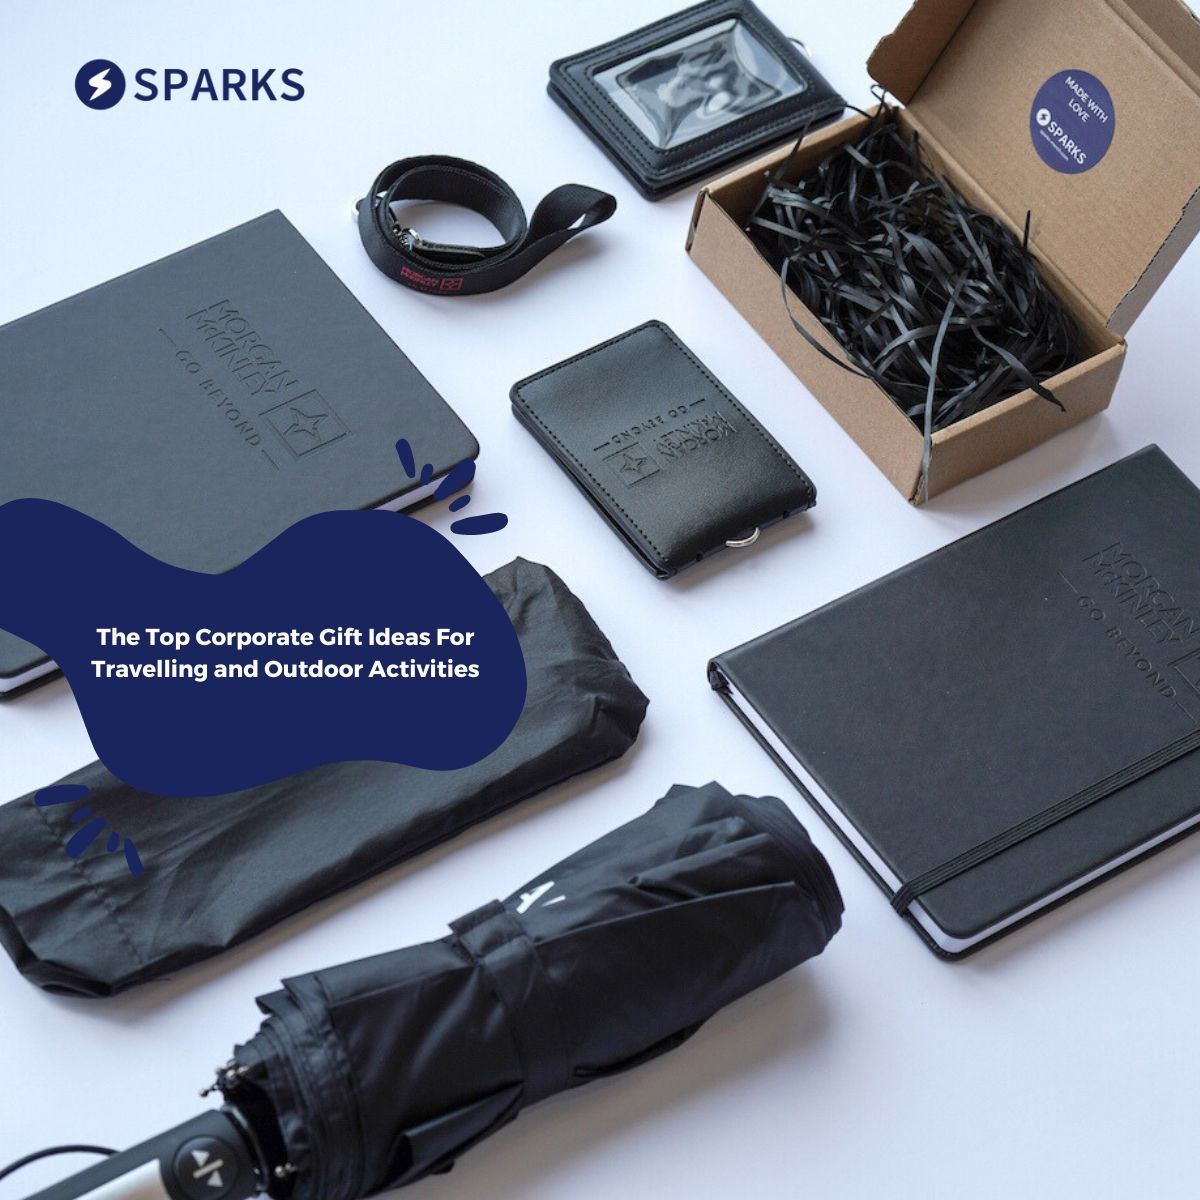 The Top Corporate Gift Ideas For Travelling and Outdoor Activities